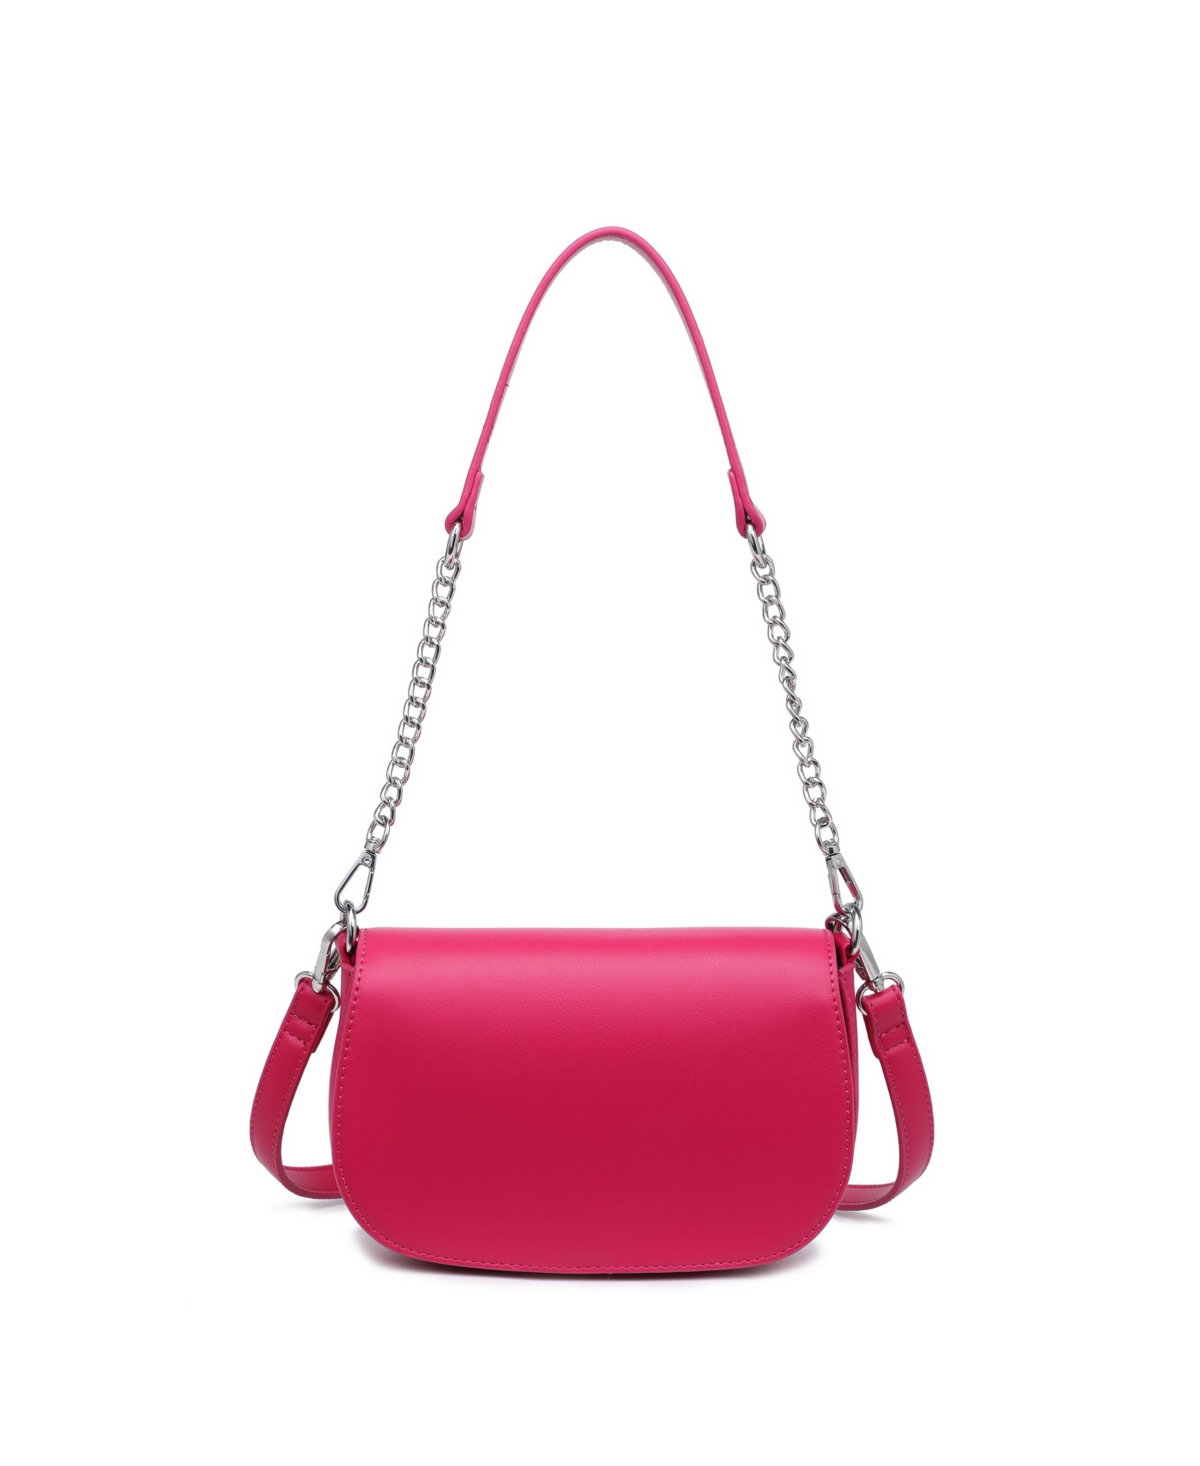 Urban Expressions Tracie Shoulder Bag In Hot Pink